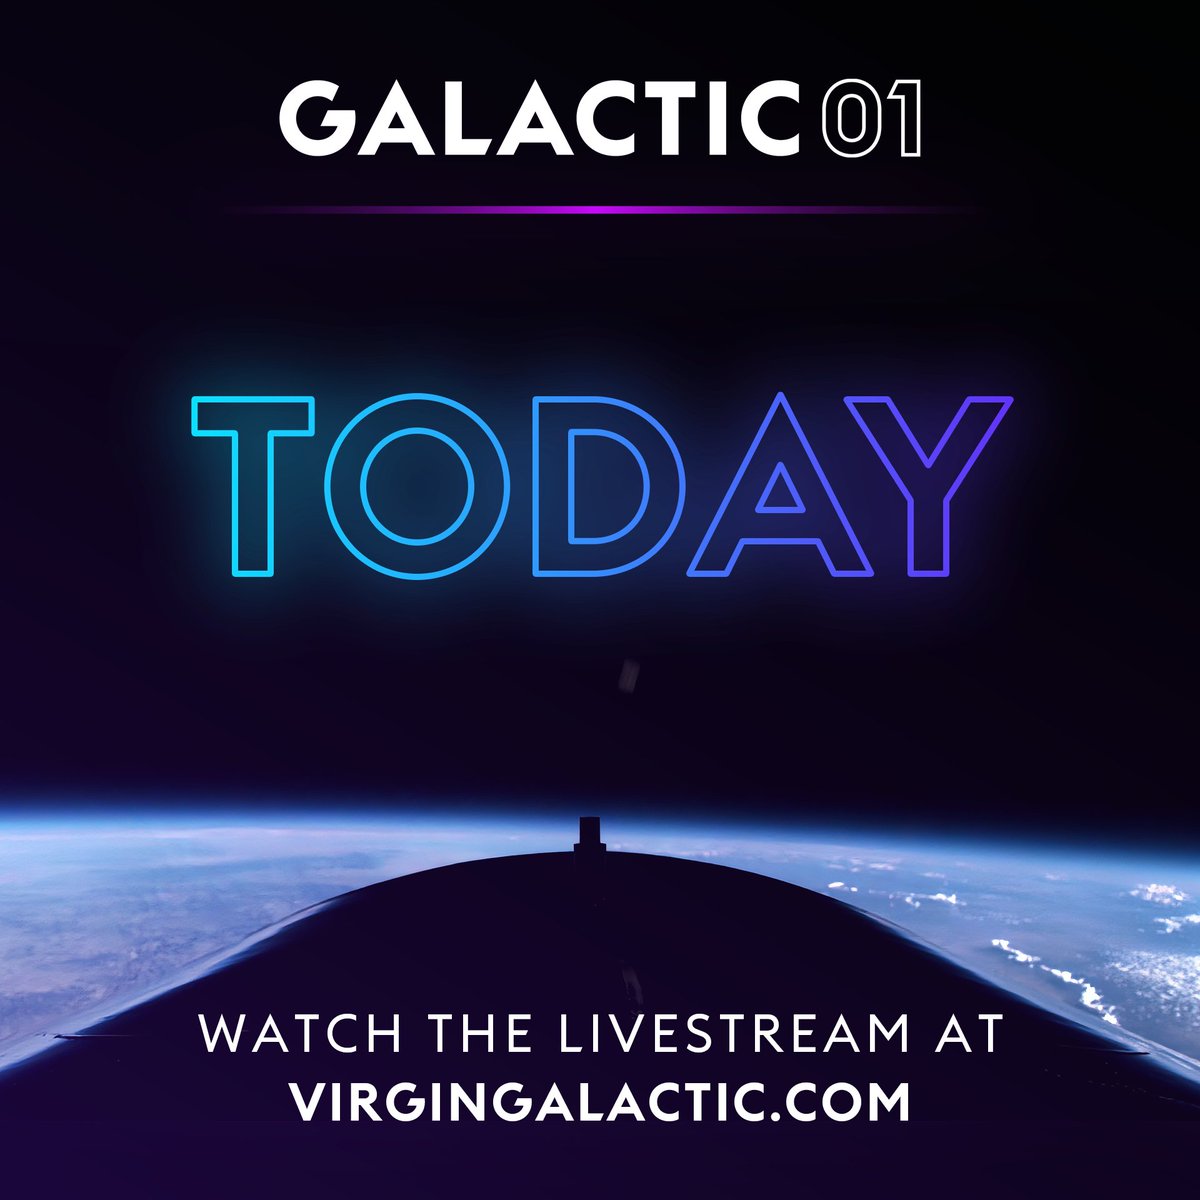 Watch the global livestream of @virgingalactic’s first commercial spaceflight today, from 9:00 am MDT | 11:00 am EDT | 16:00 BST: virgingalactic.com #Galactic01